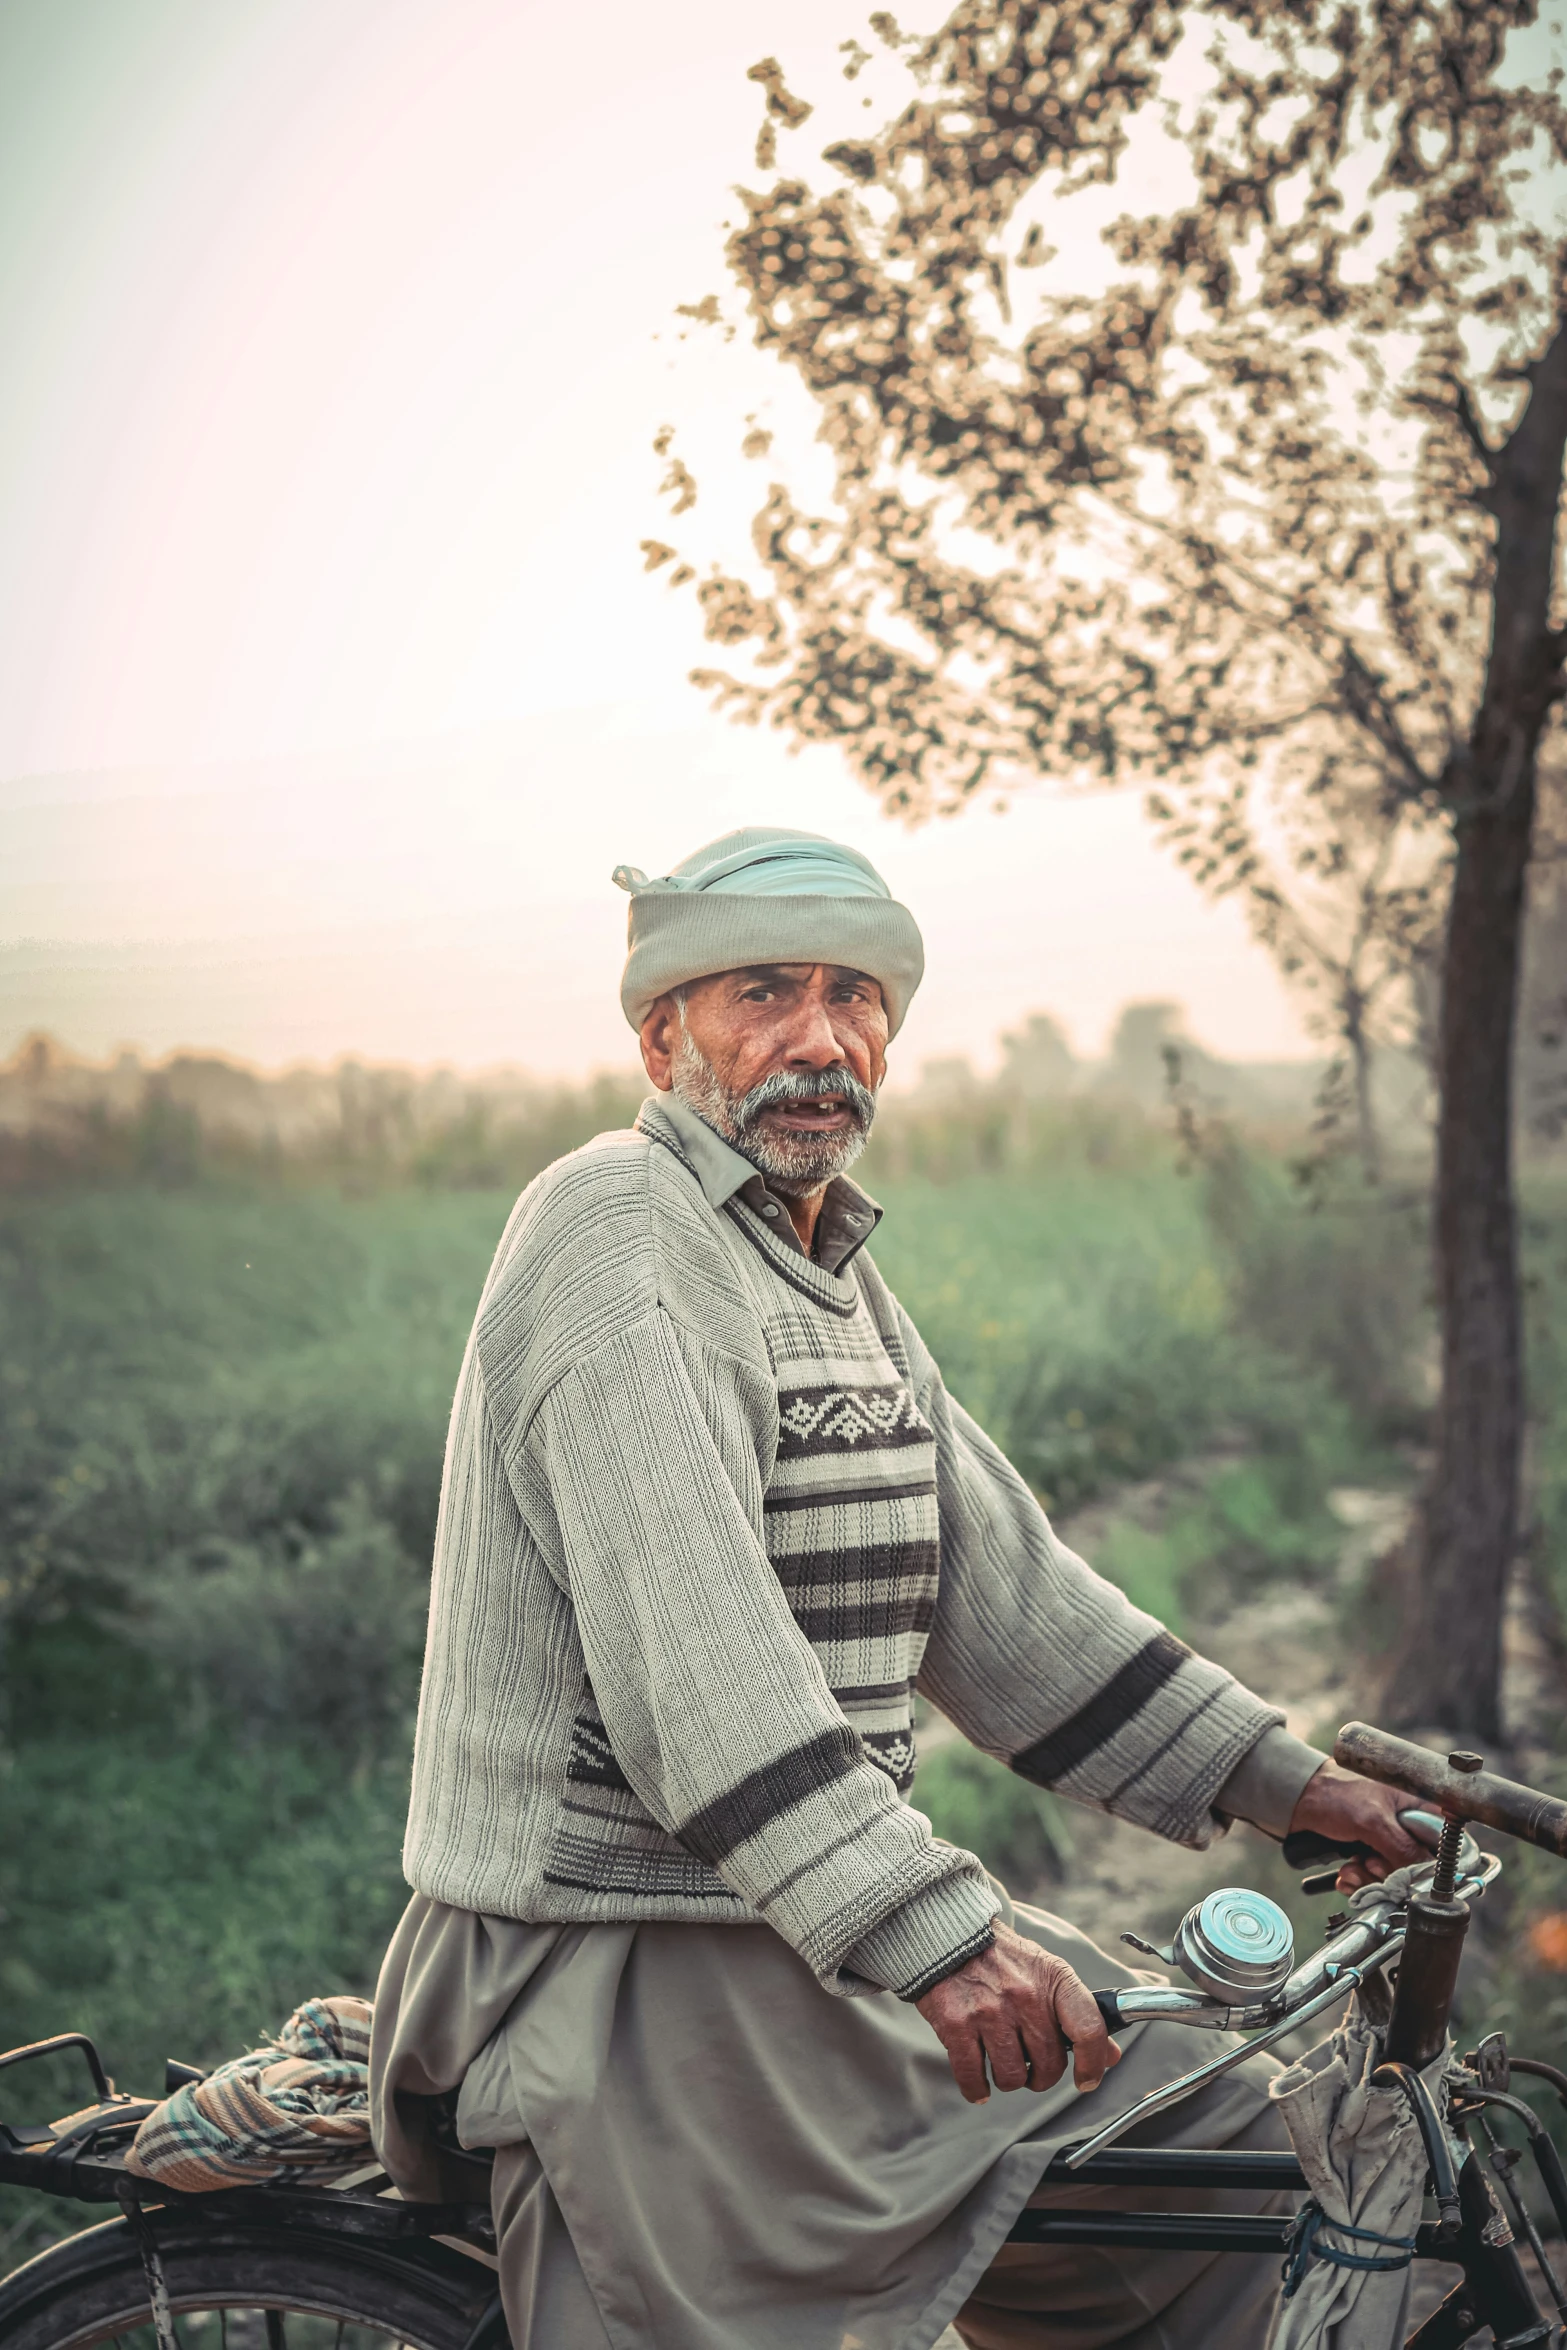 a man on his bike in a rural area